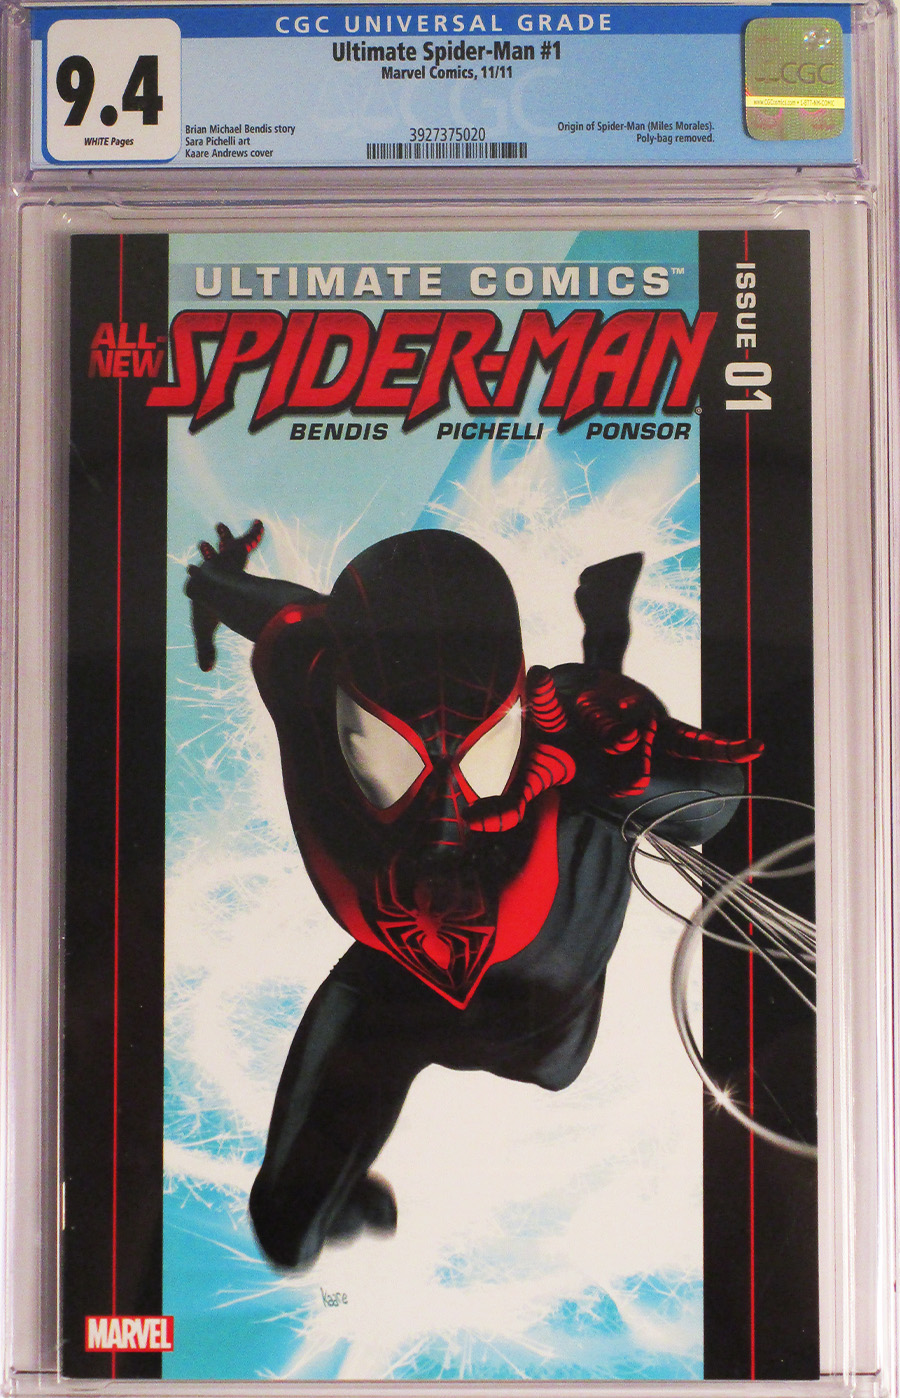 Ultimate Comics Spider-Man Vol 2 #1 Cover F CGC 9.4 Regular Kaare Andrews Cover Without Polybag